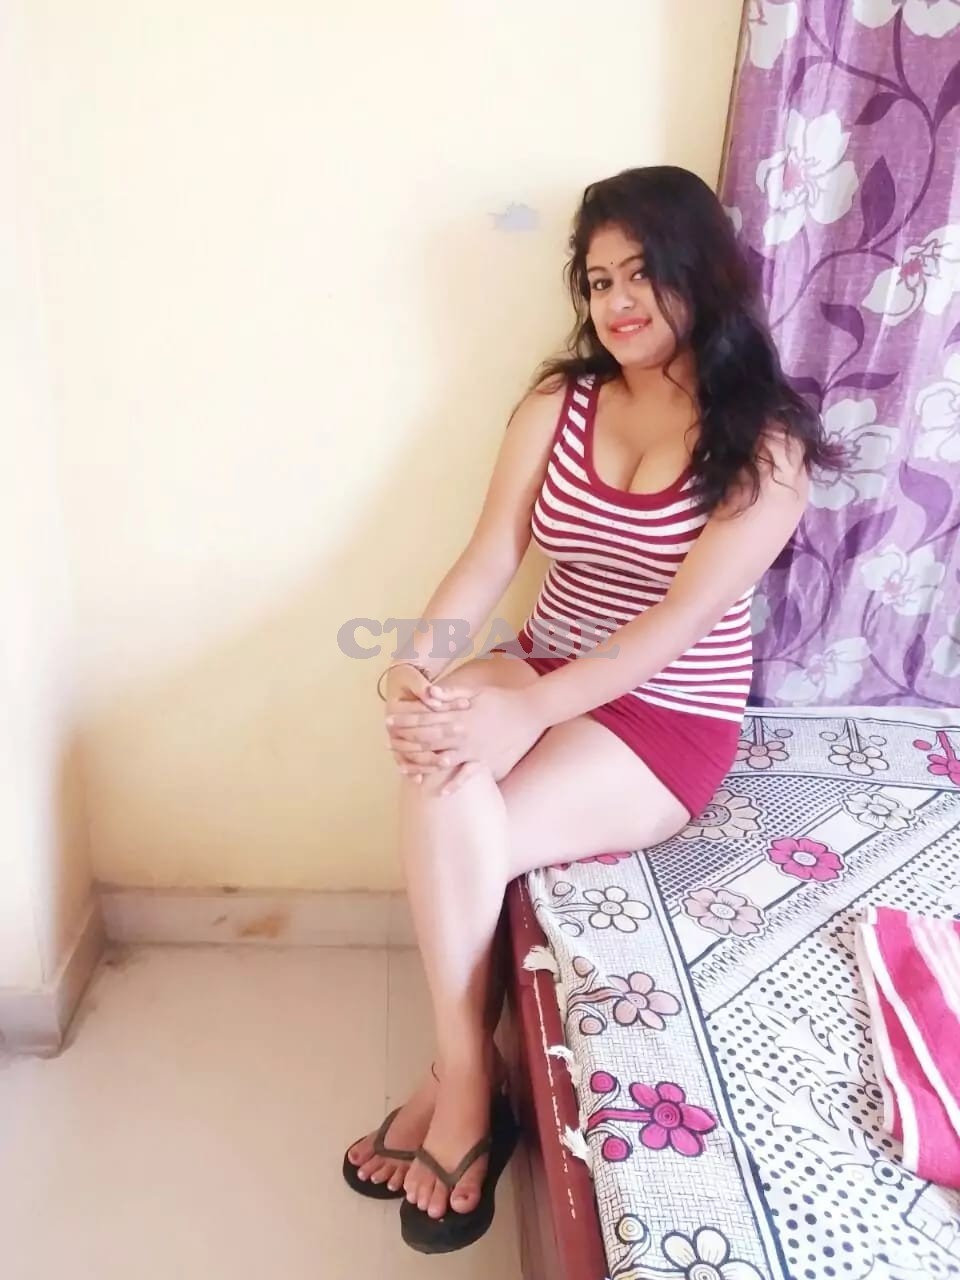 Telugu Call Girls In Hyderabad With Real Meet Available 24x7